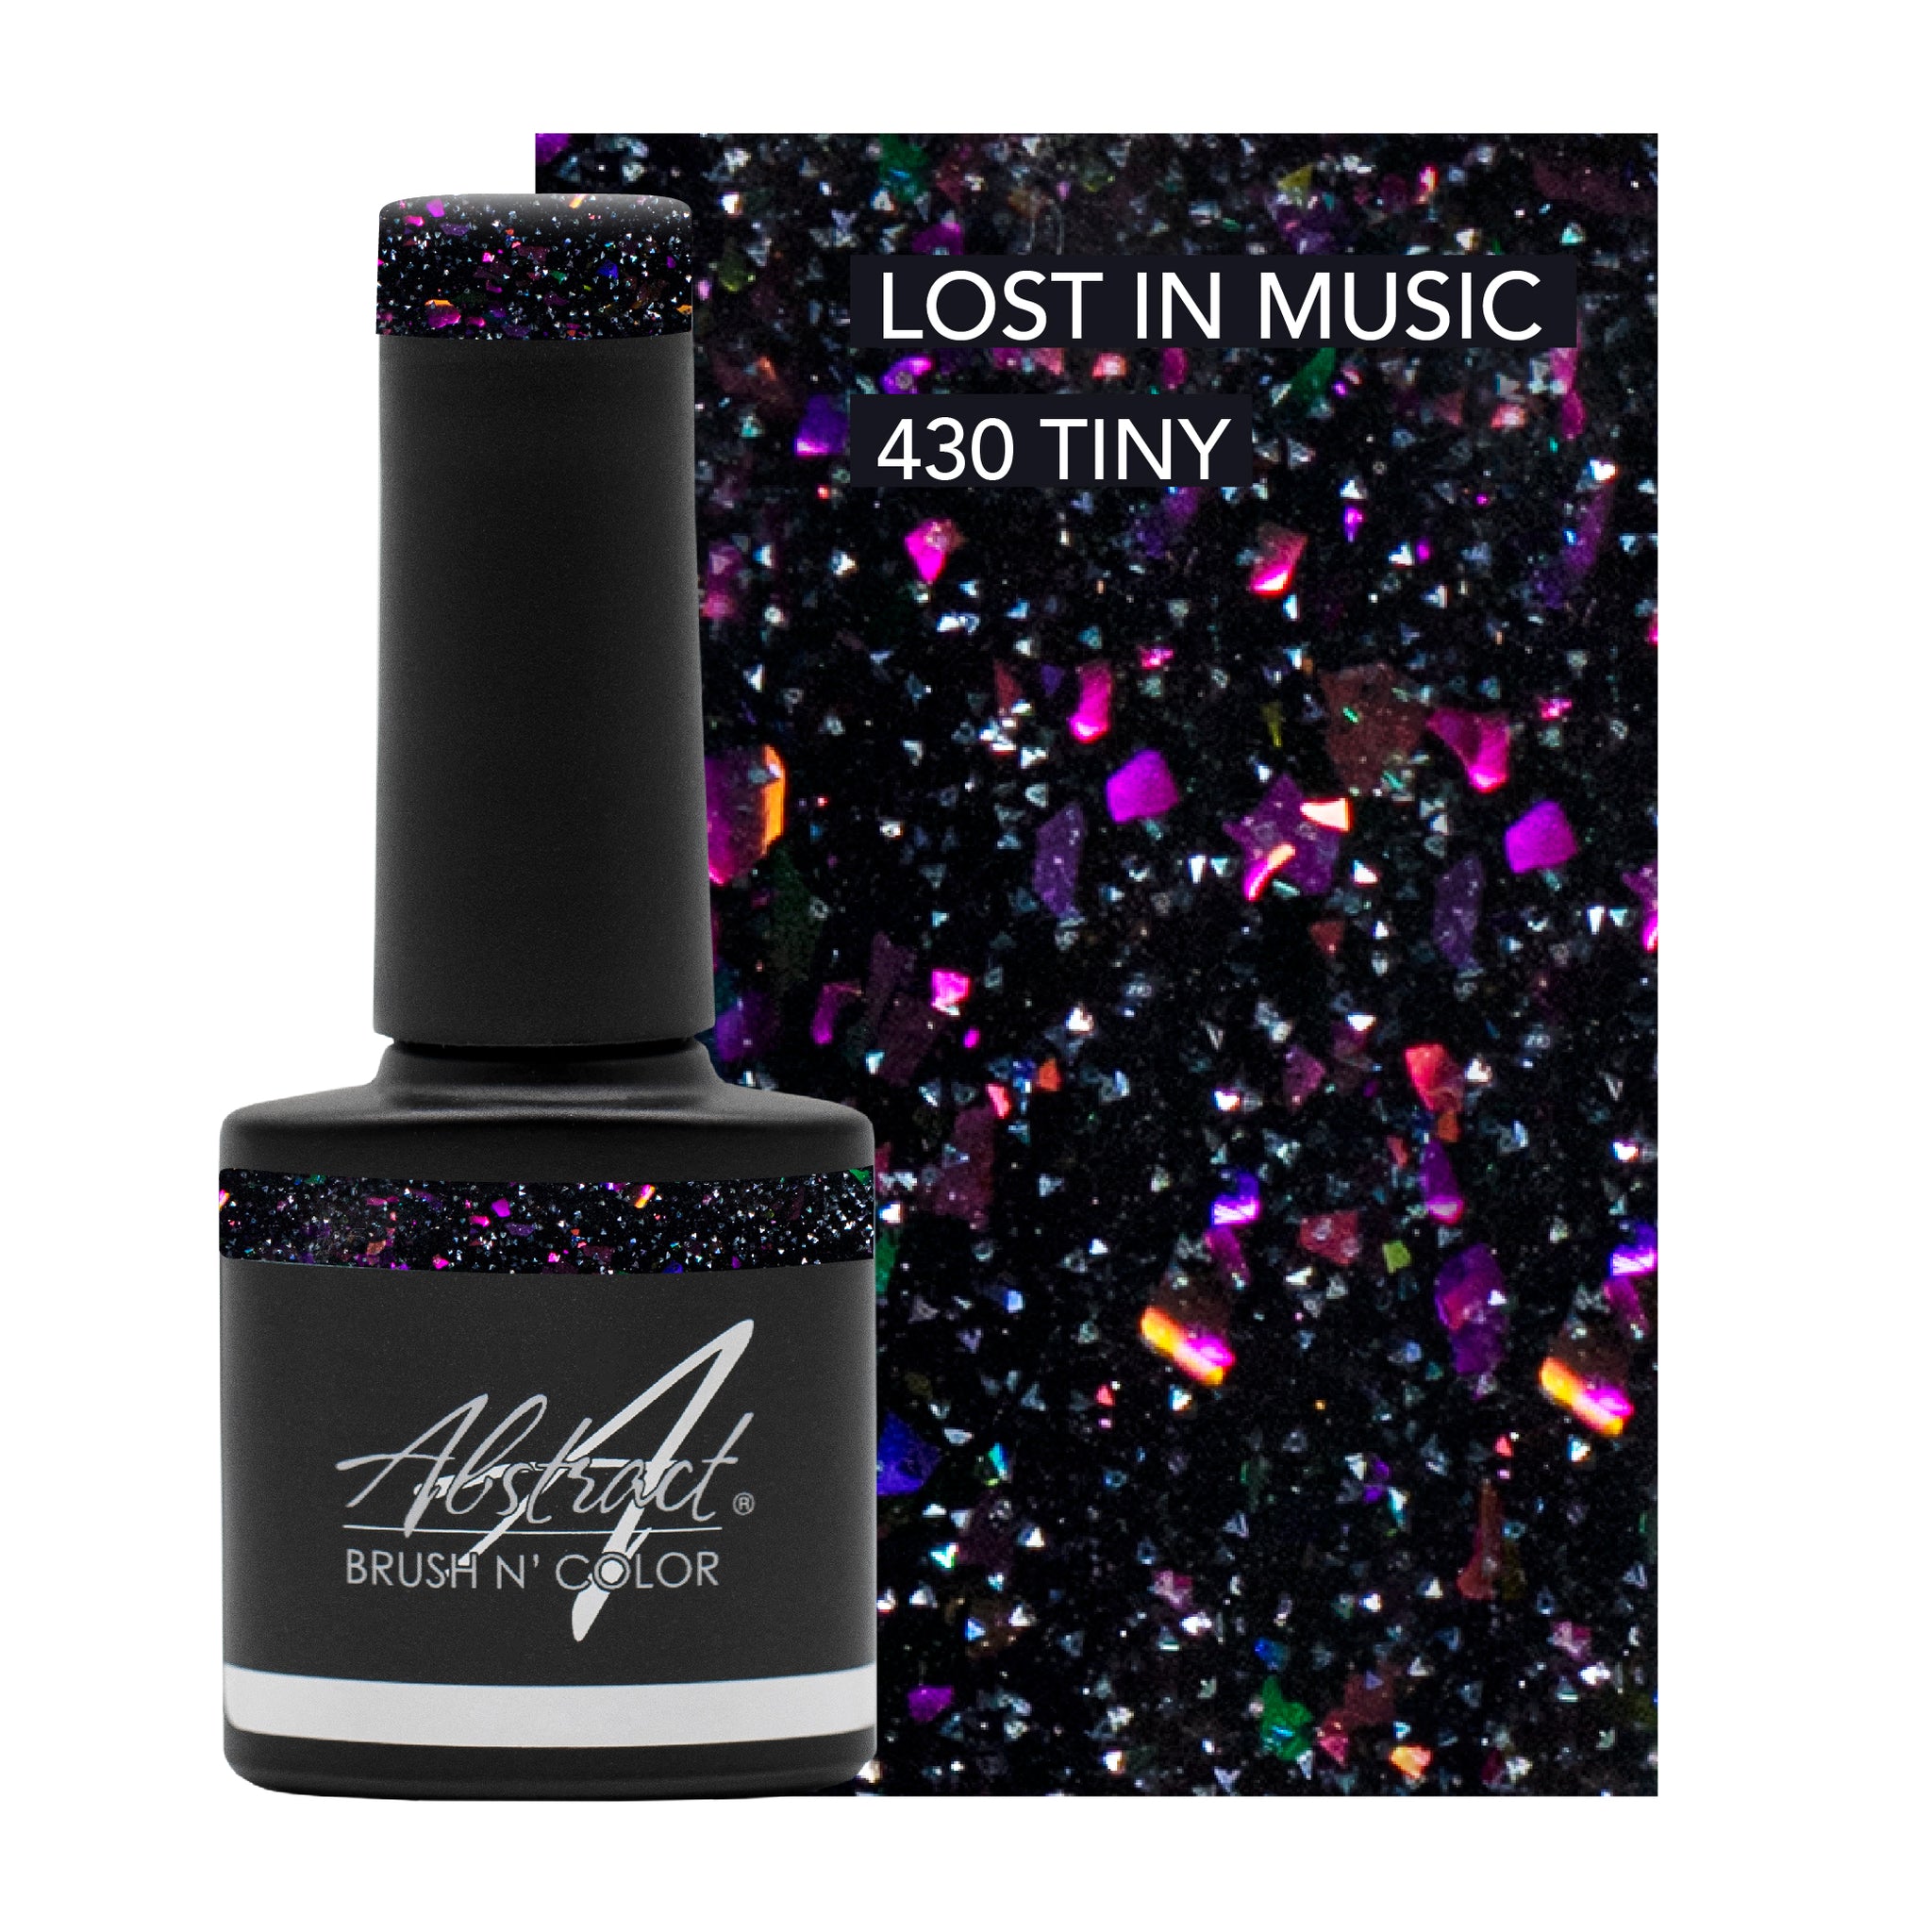 Lost in Music Tiny 7,5ml